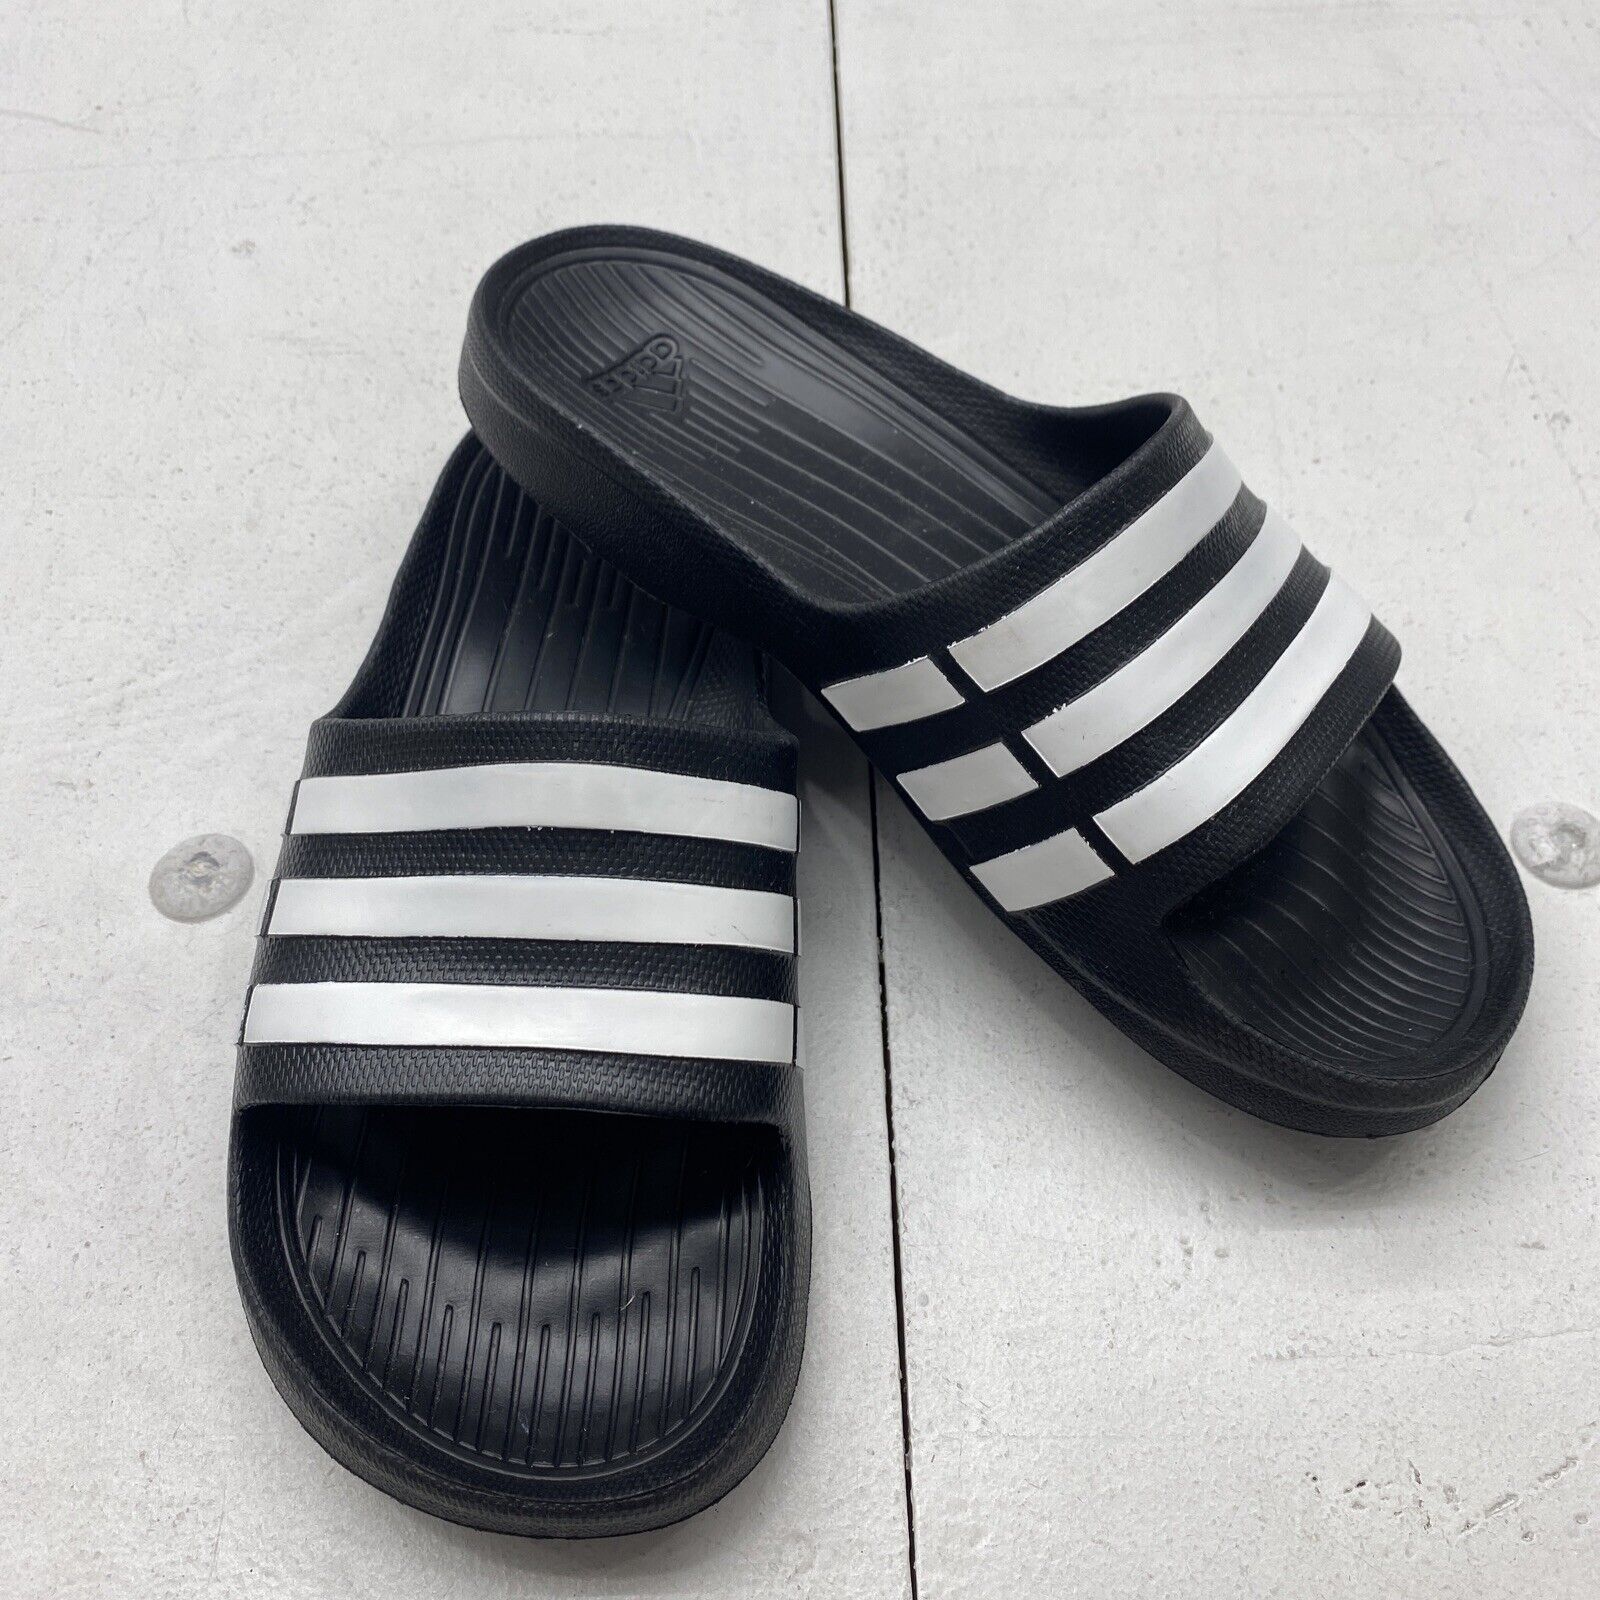 Adilette sandals Adidas Black size 11 US in Rubber - 40485236